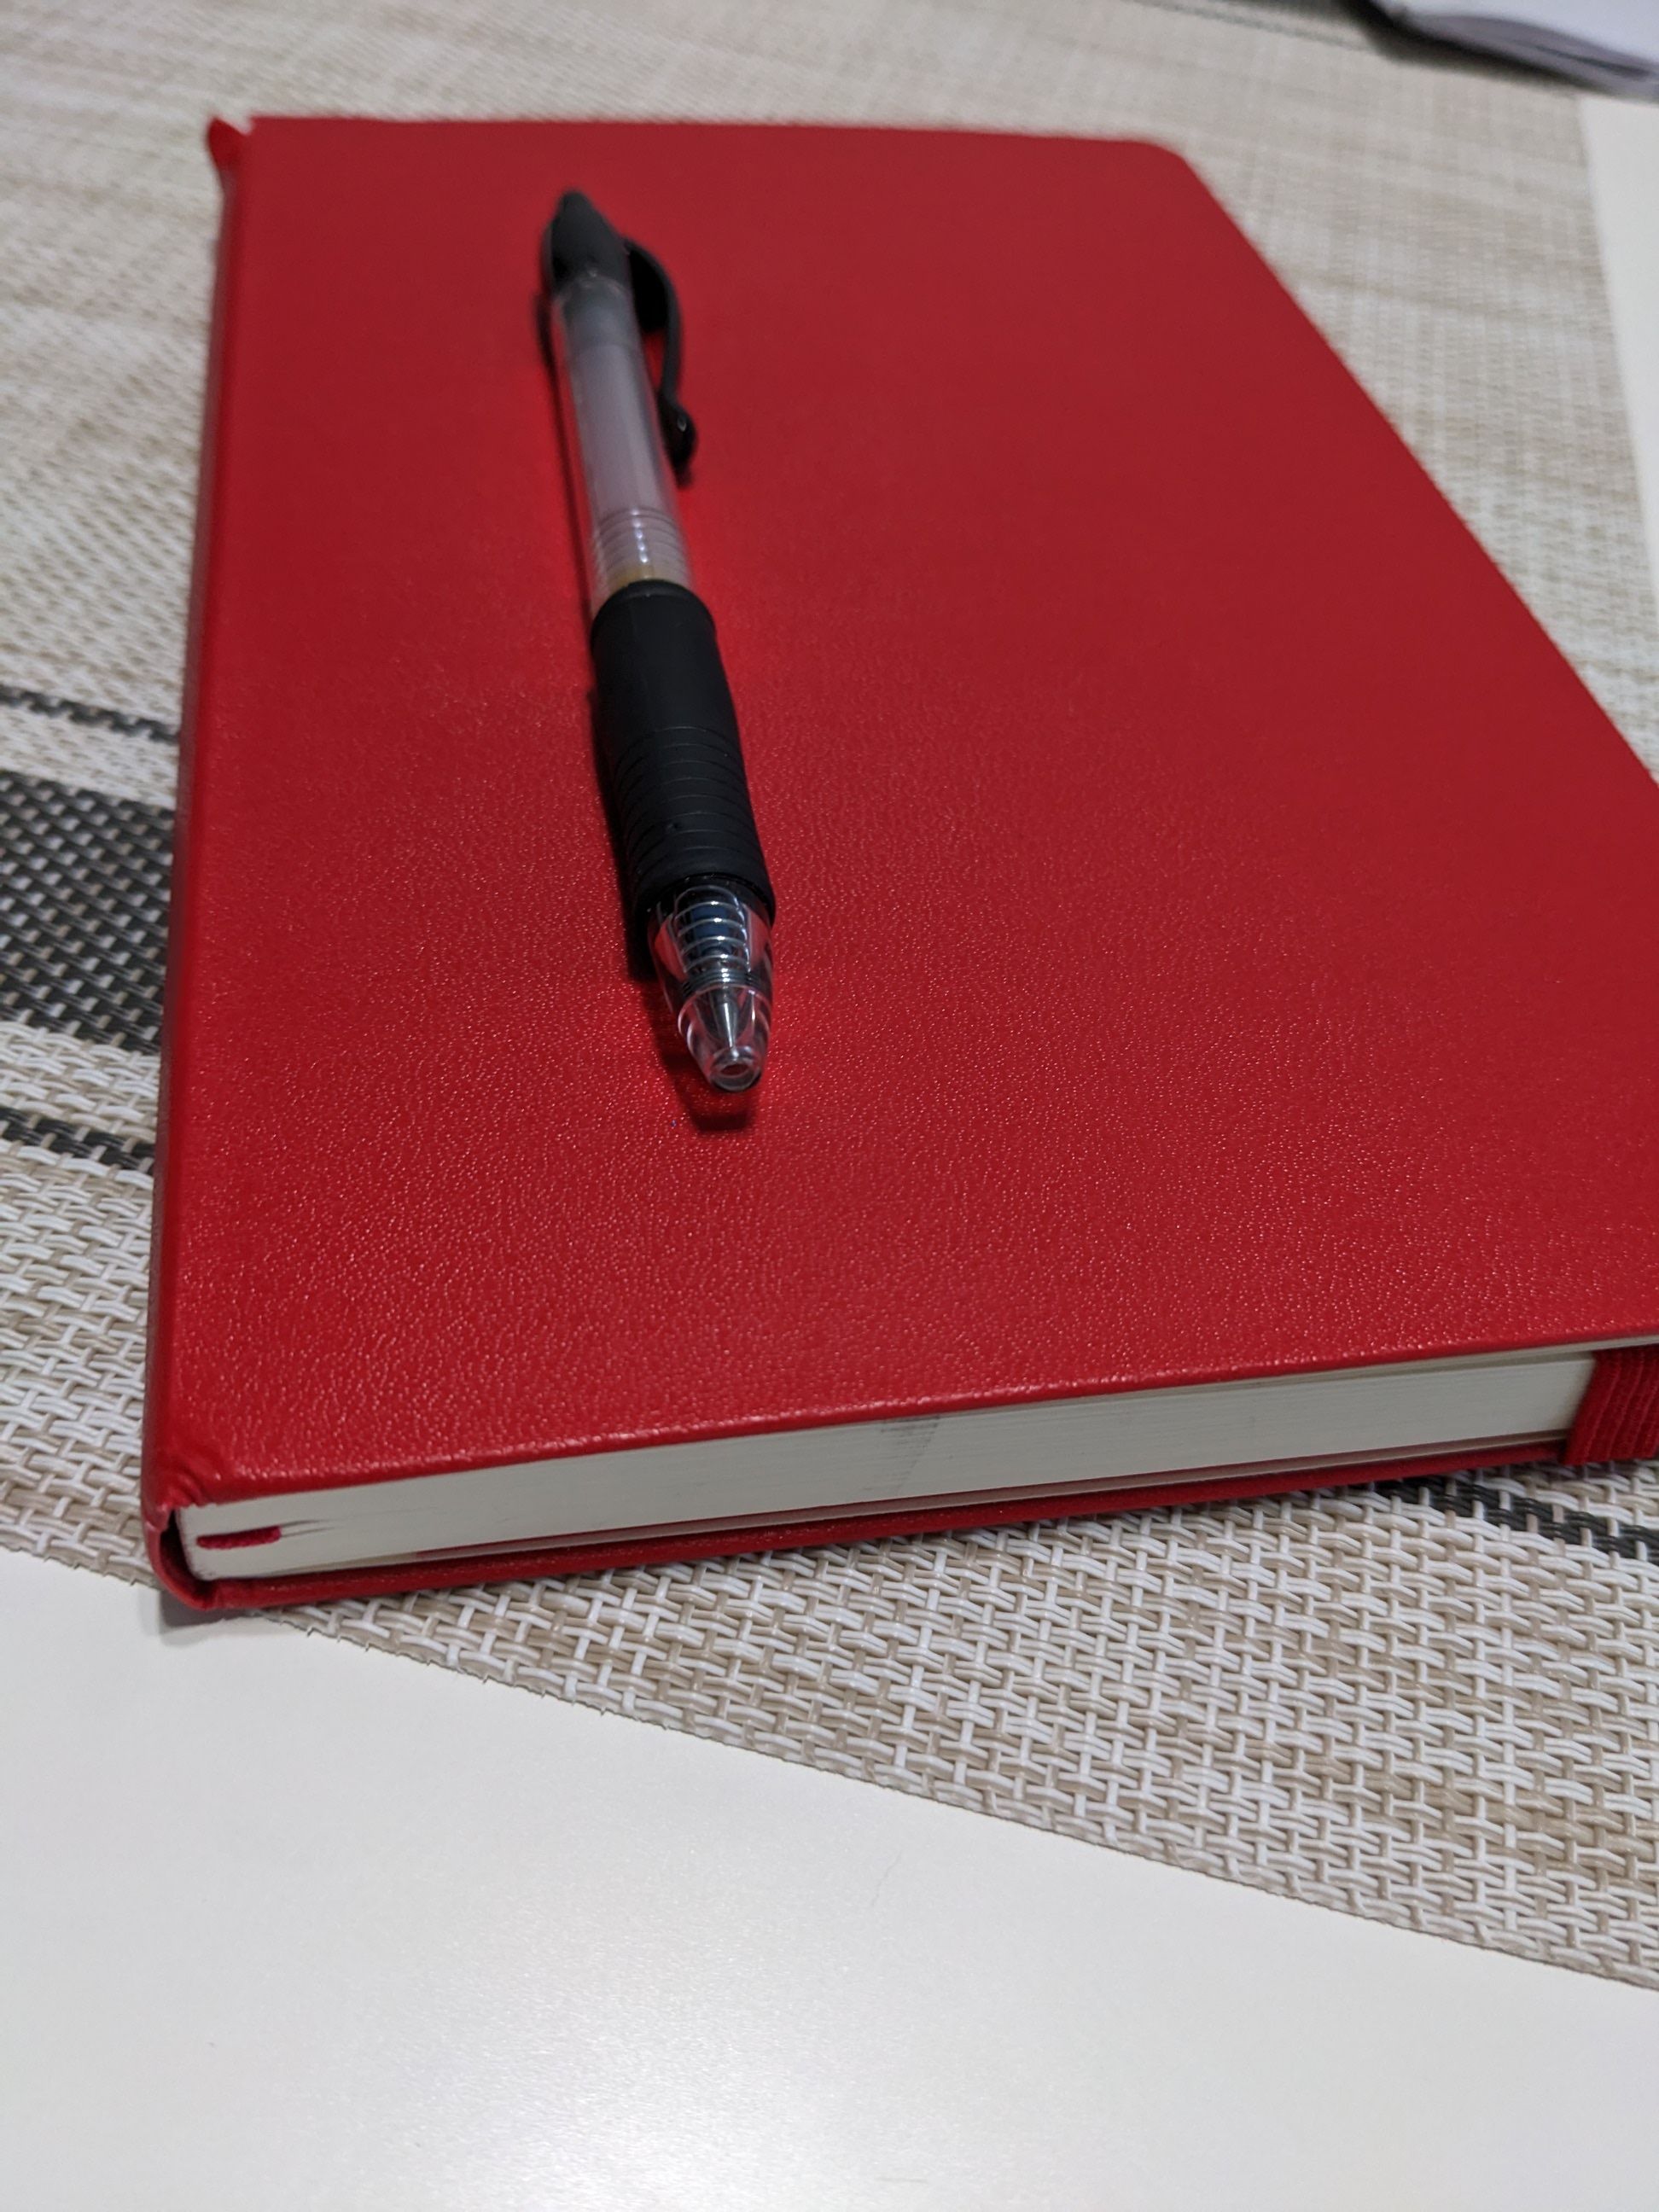 A red Moleskin gifted to me by my brother in law, January 2023